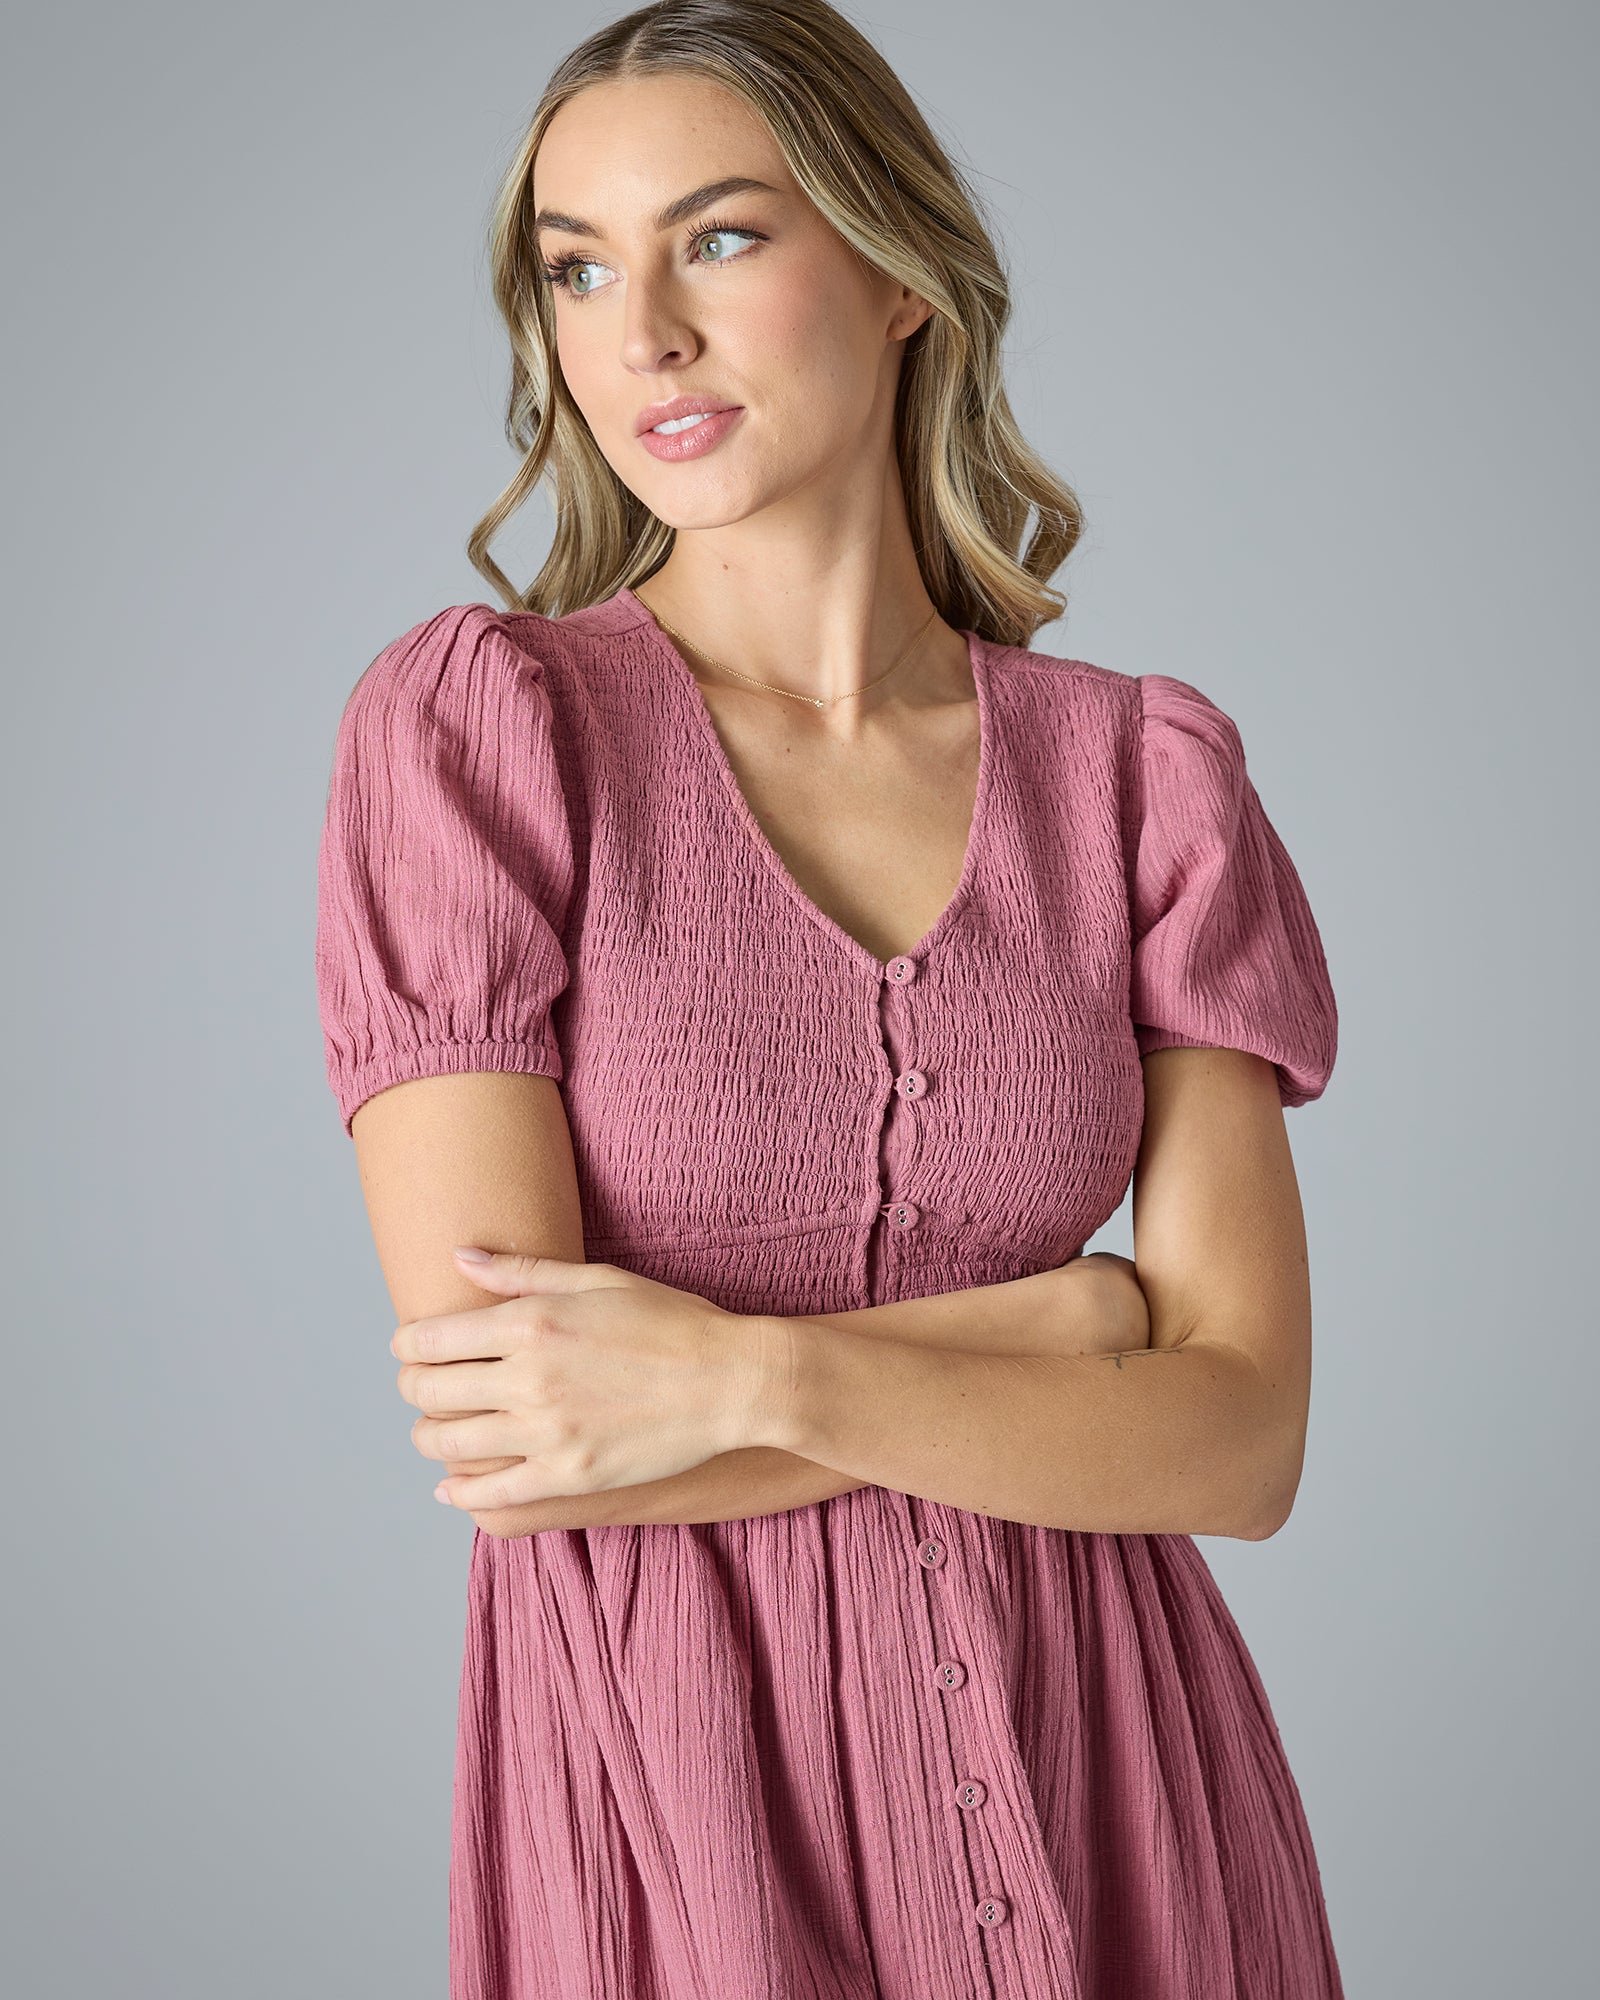 Close up of woman in a pink short sleeve, v-neck, midi-length dress with buttons down the front